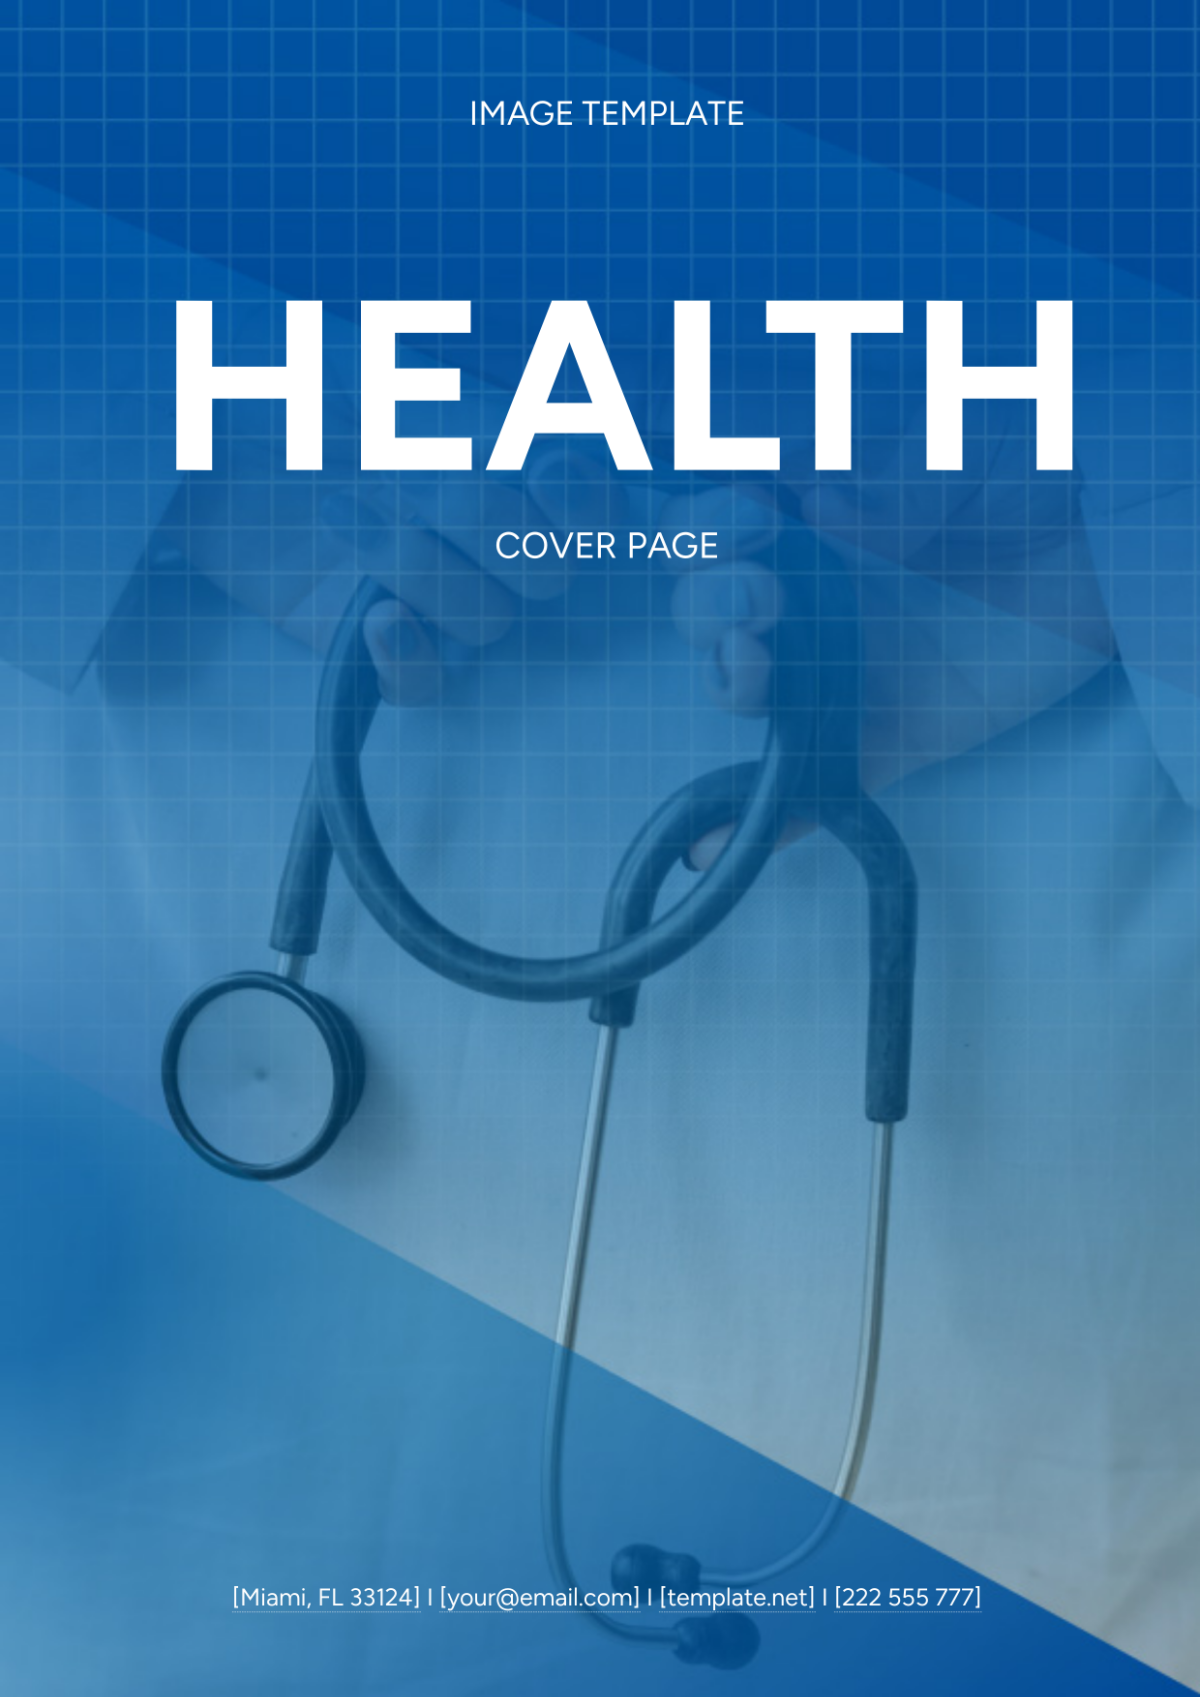 Free Health Cover Page Image Template